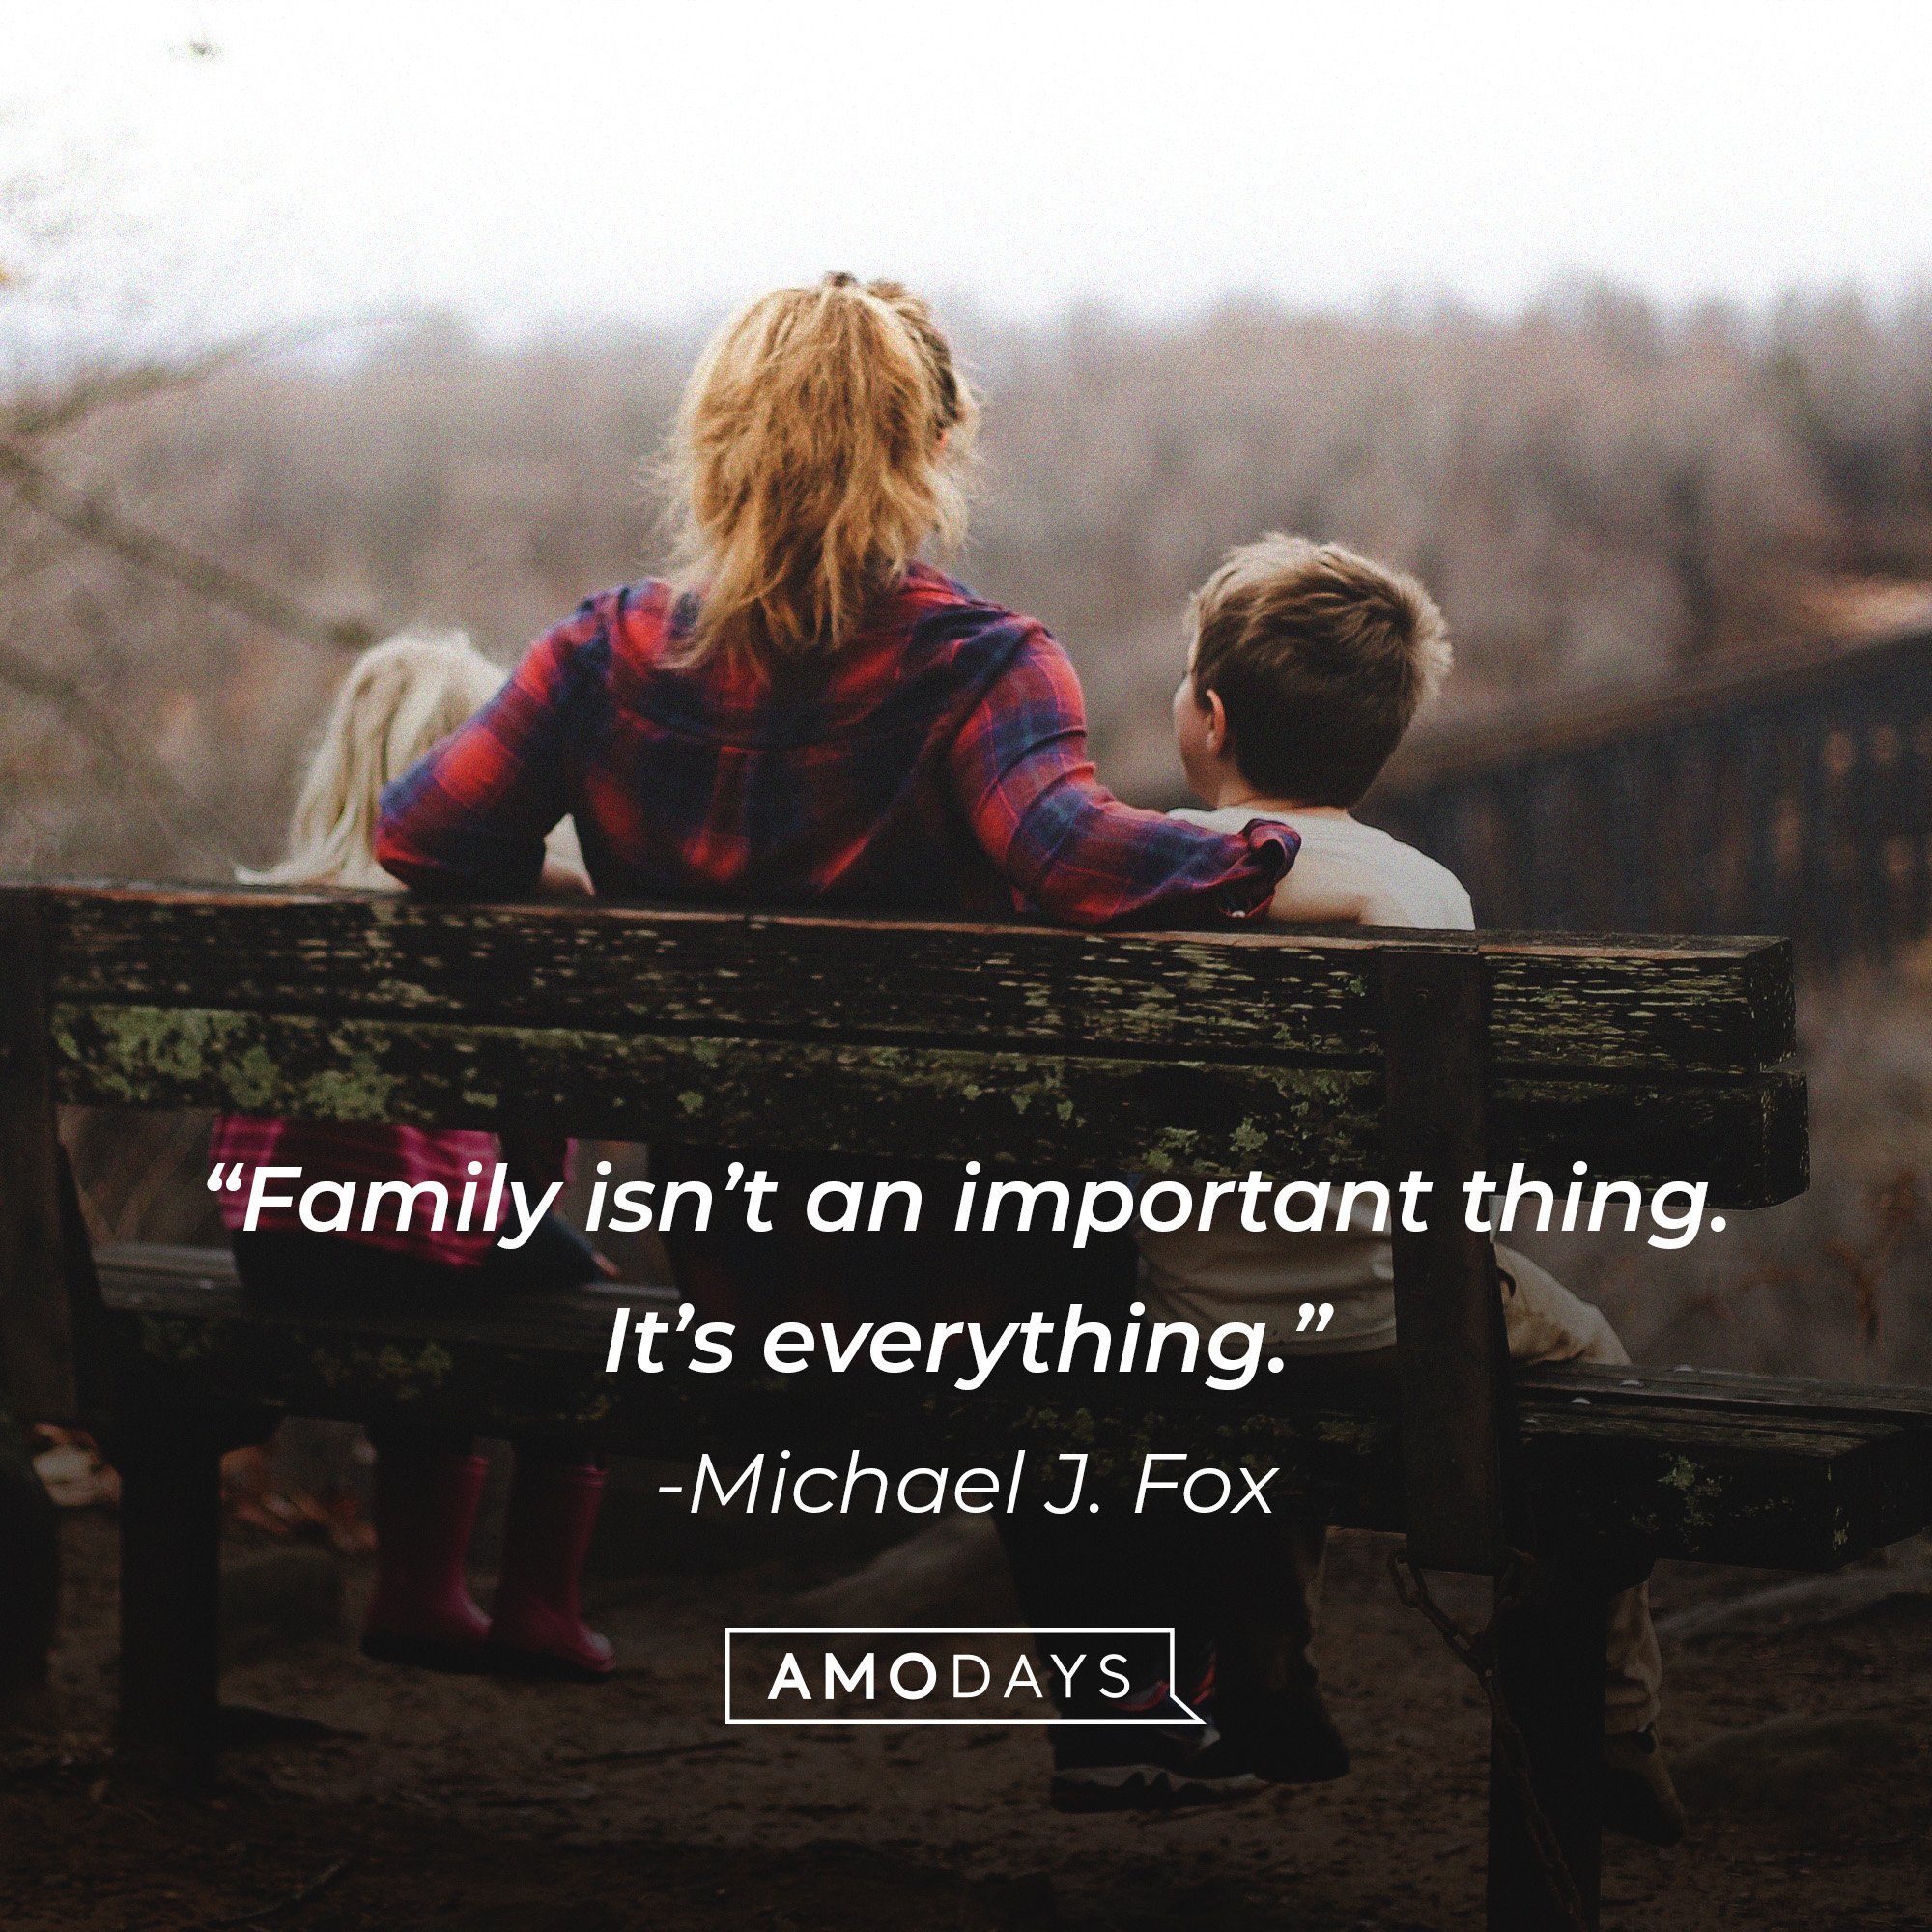 Michael J. Fox's quote: “Family isn’t an important thing. It’s everything.” | Image: AmoDays